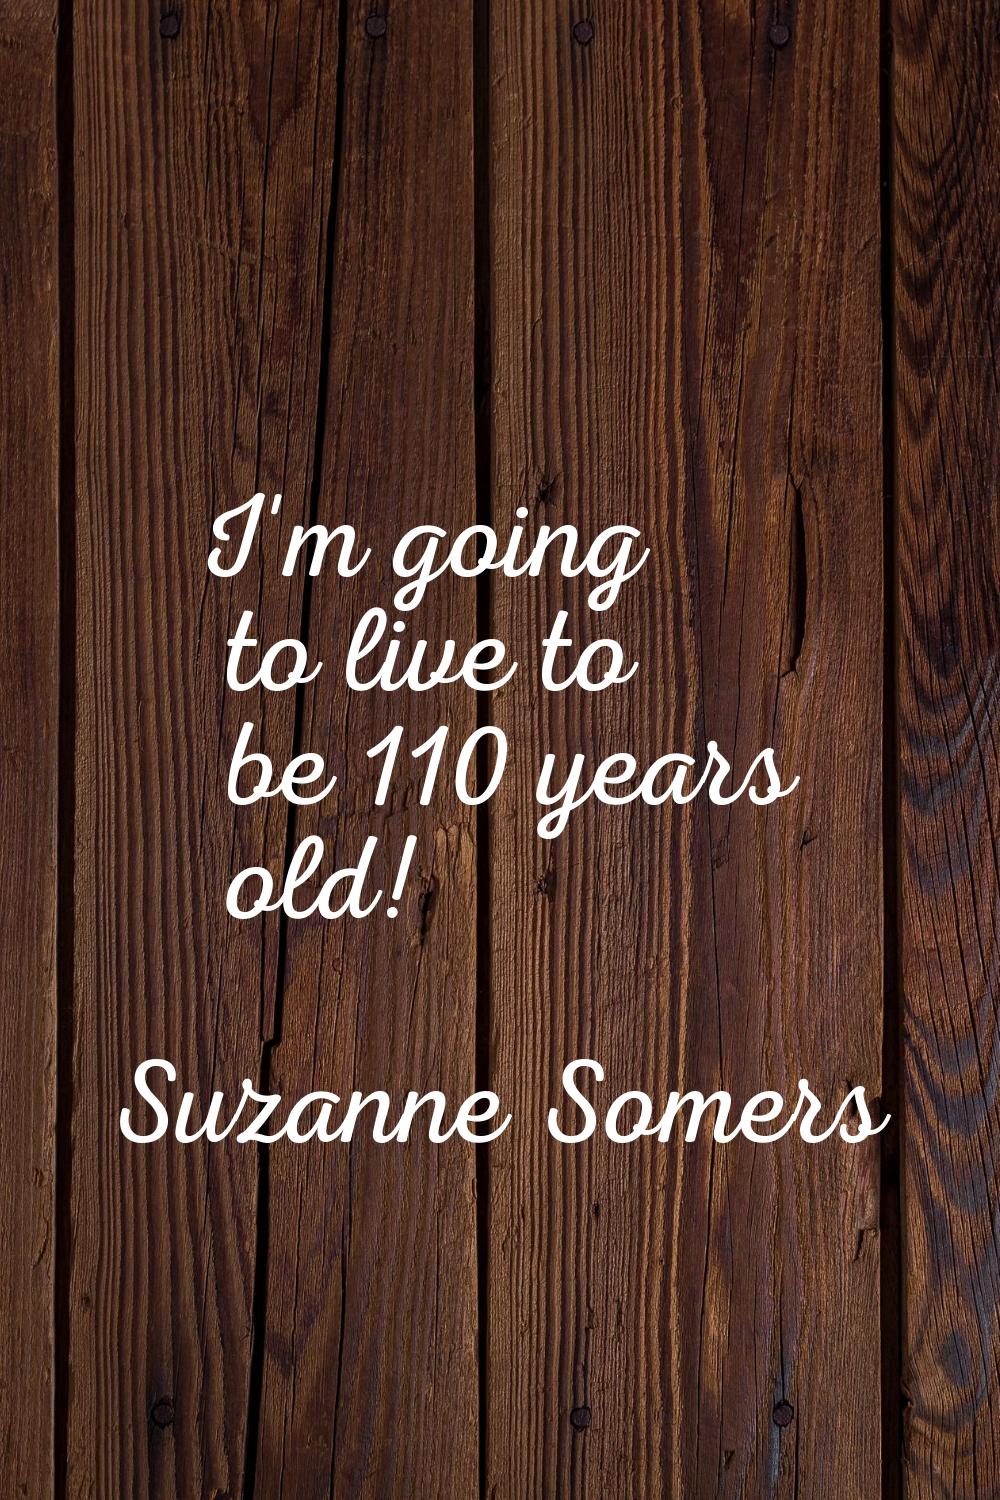 I'm going to live to be 110 years old!